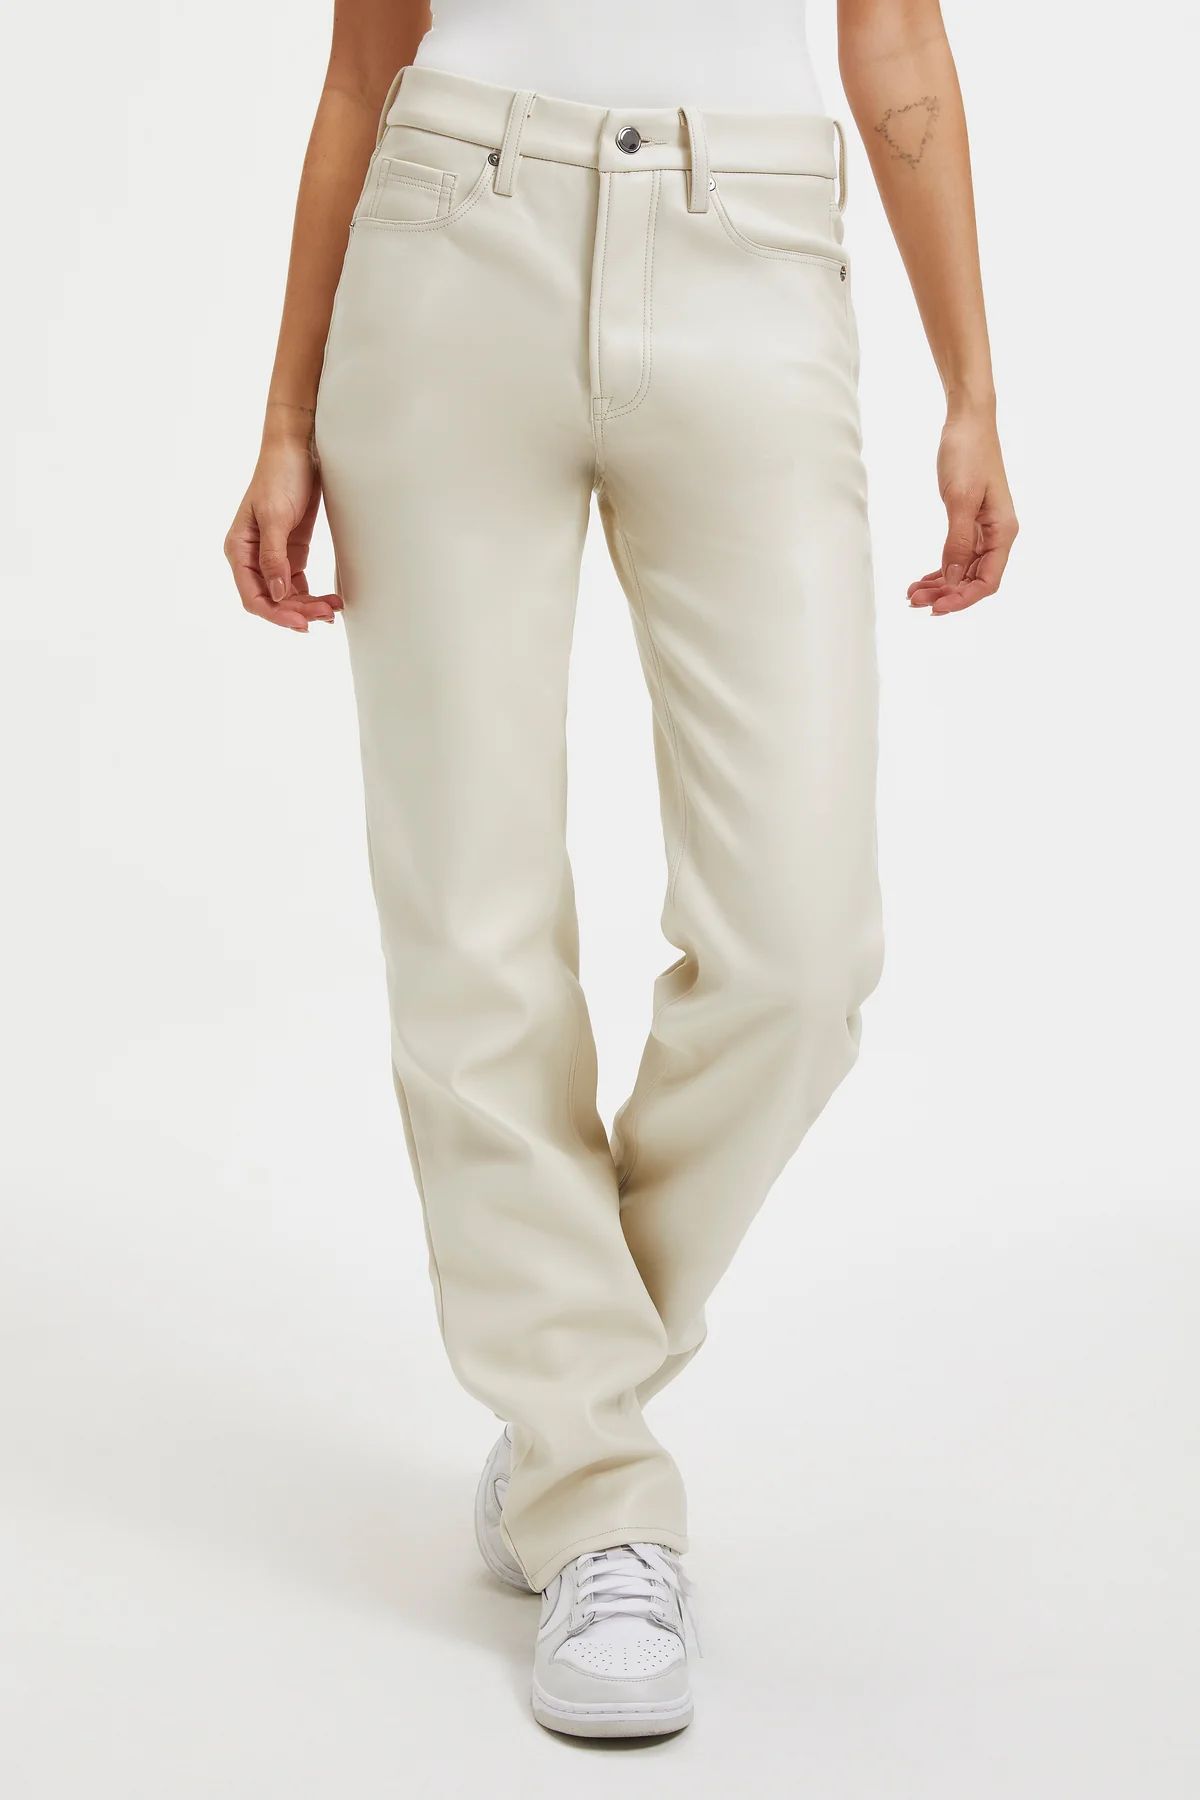 GOOD ICON FAUX LEATHER PANTS | Good American